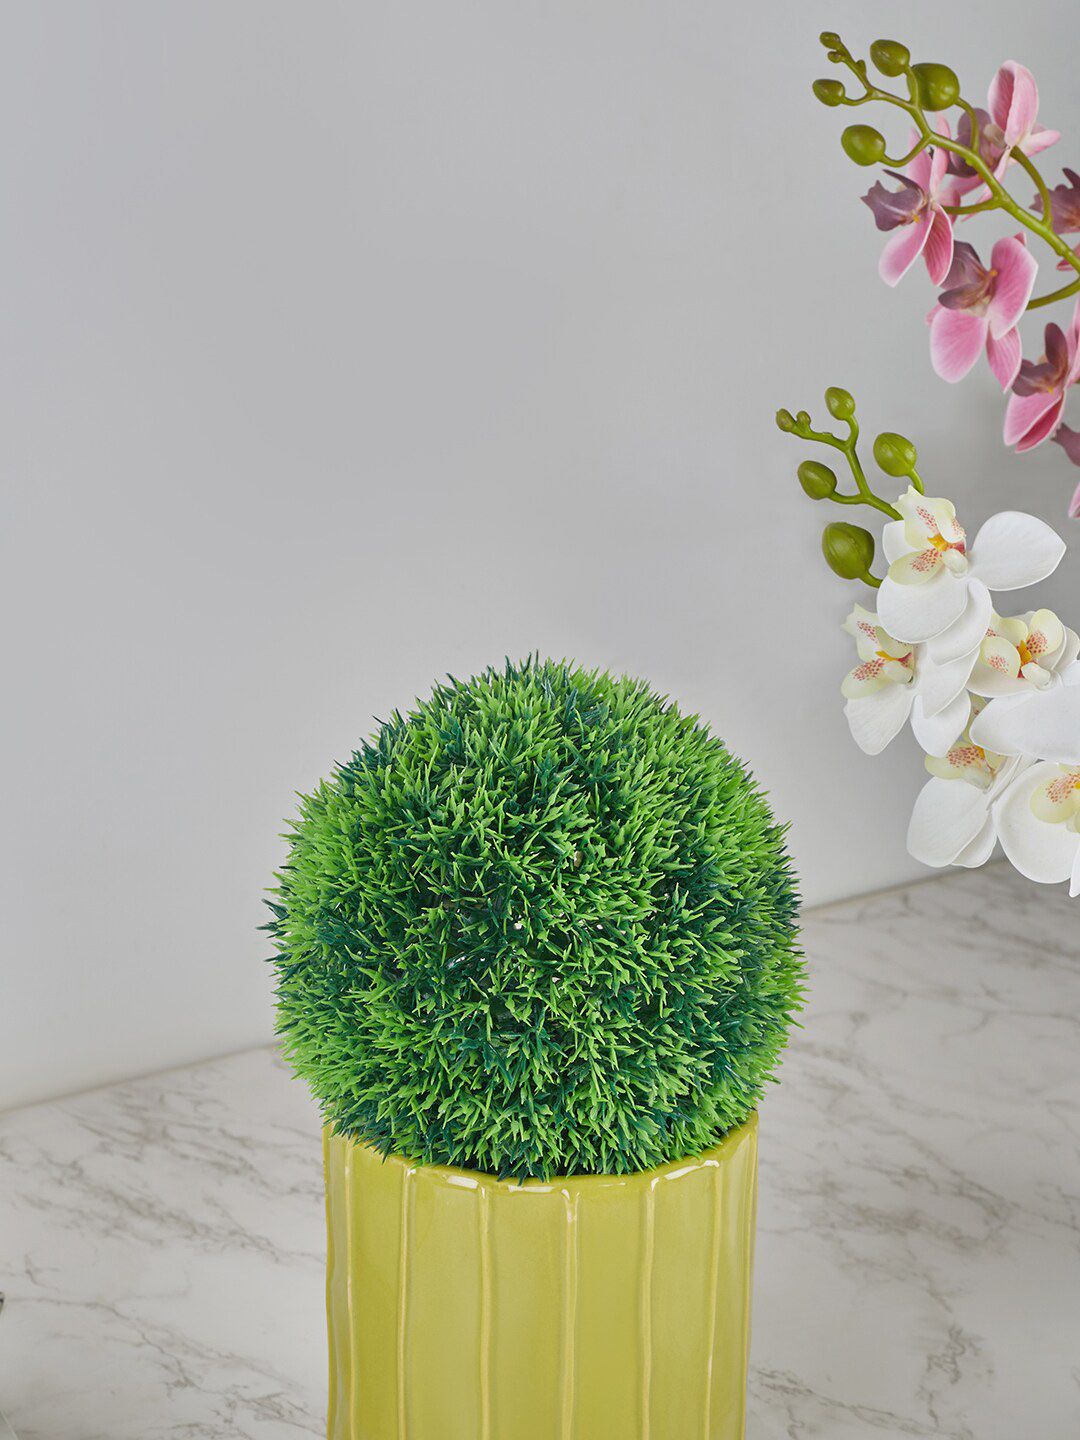 HomeTown Green Grass Decorative Ball Artificial Flowers & Plants With Pot Price in India